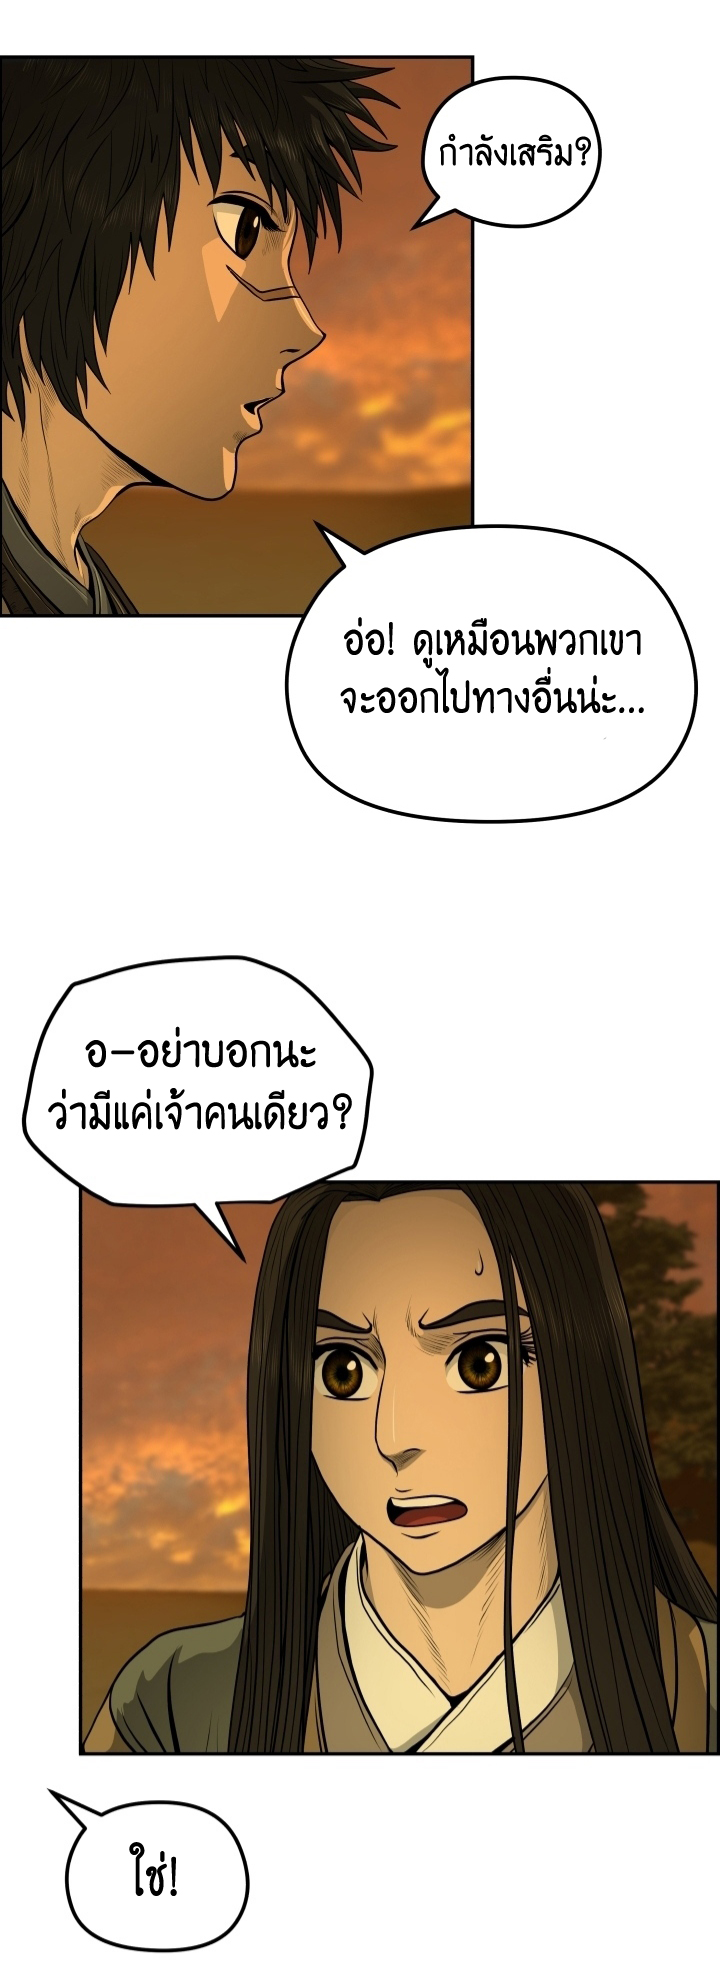 Blade of Wind and Thunder 28 (24)